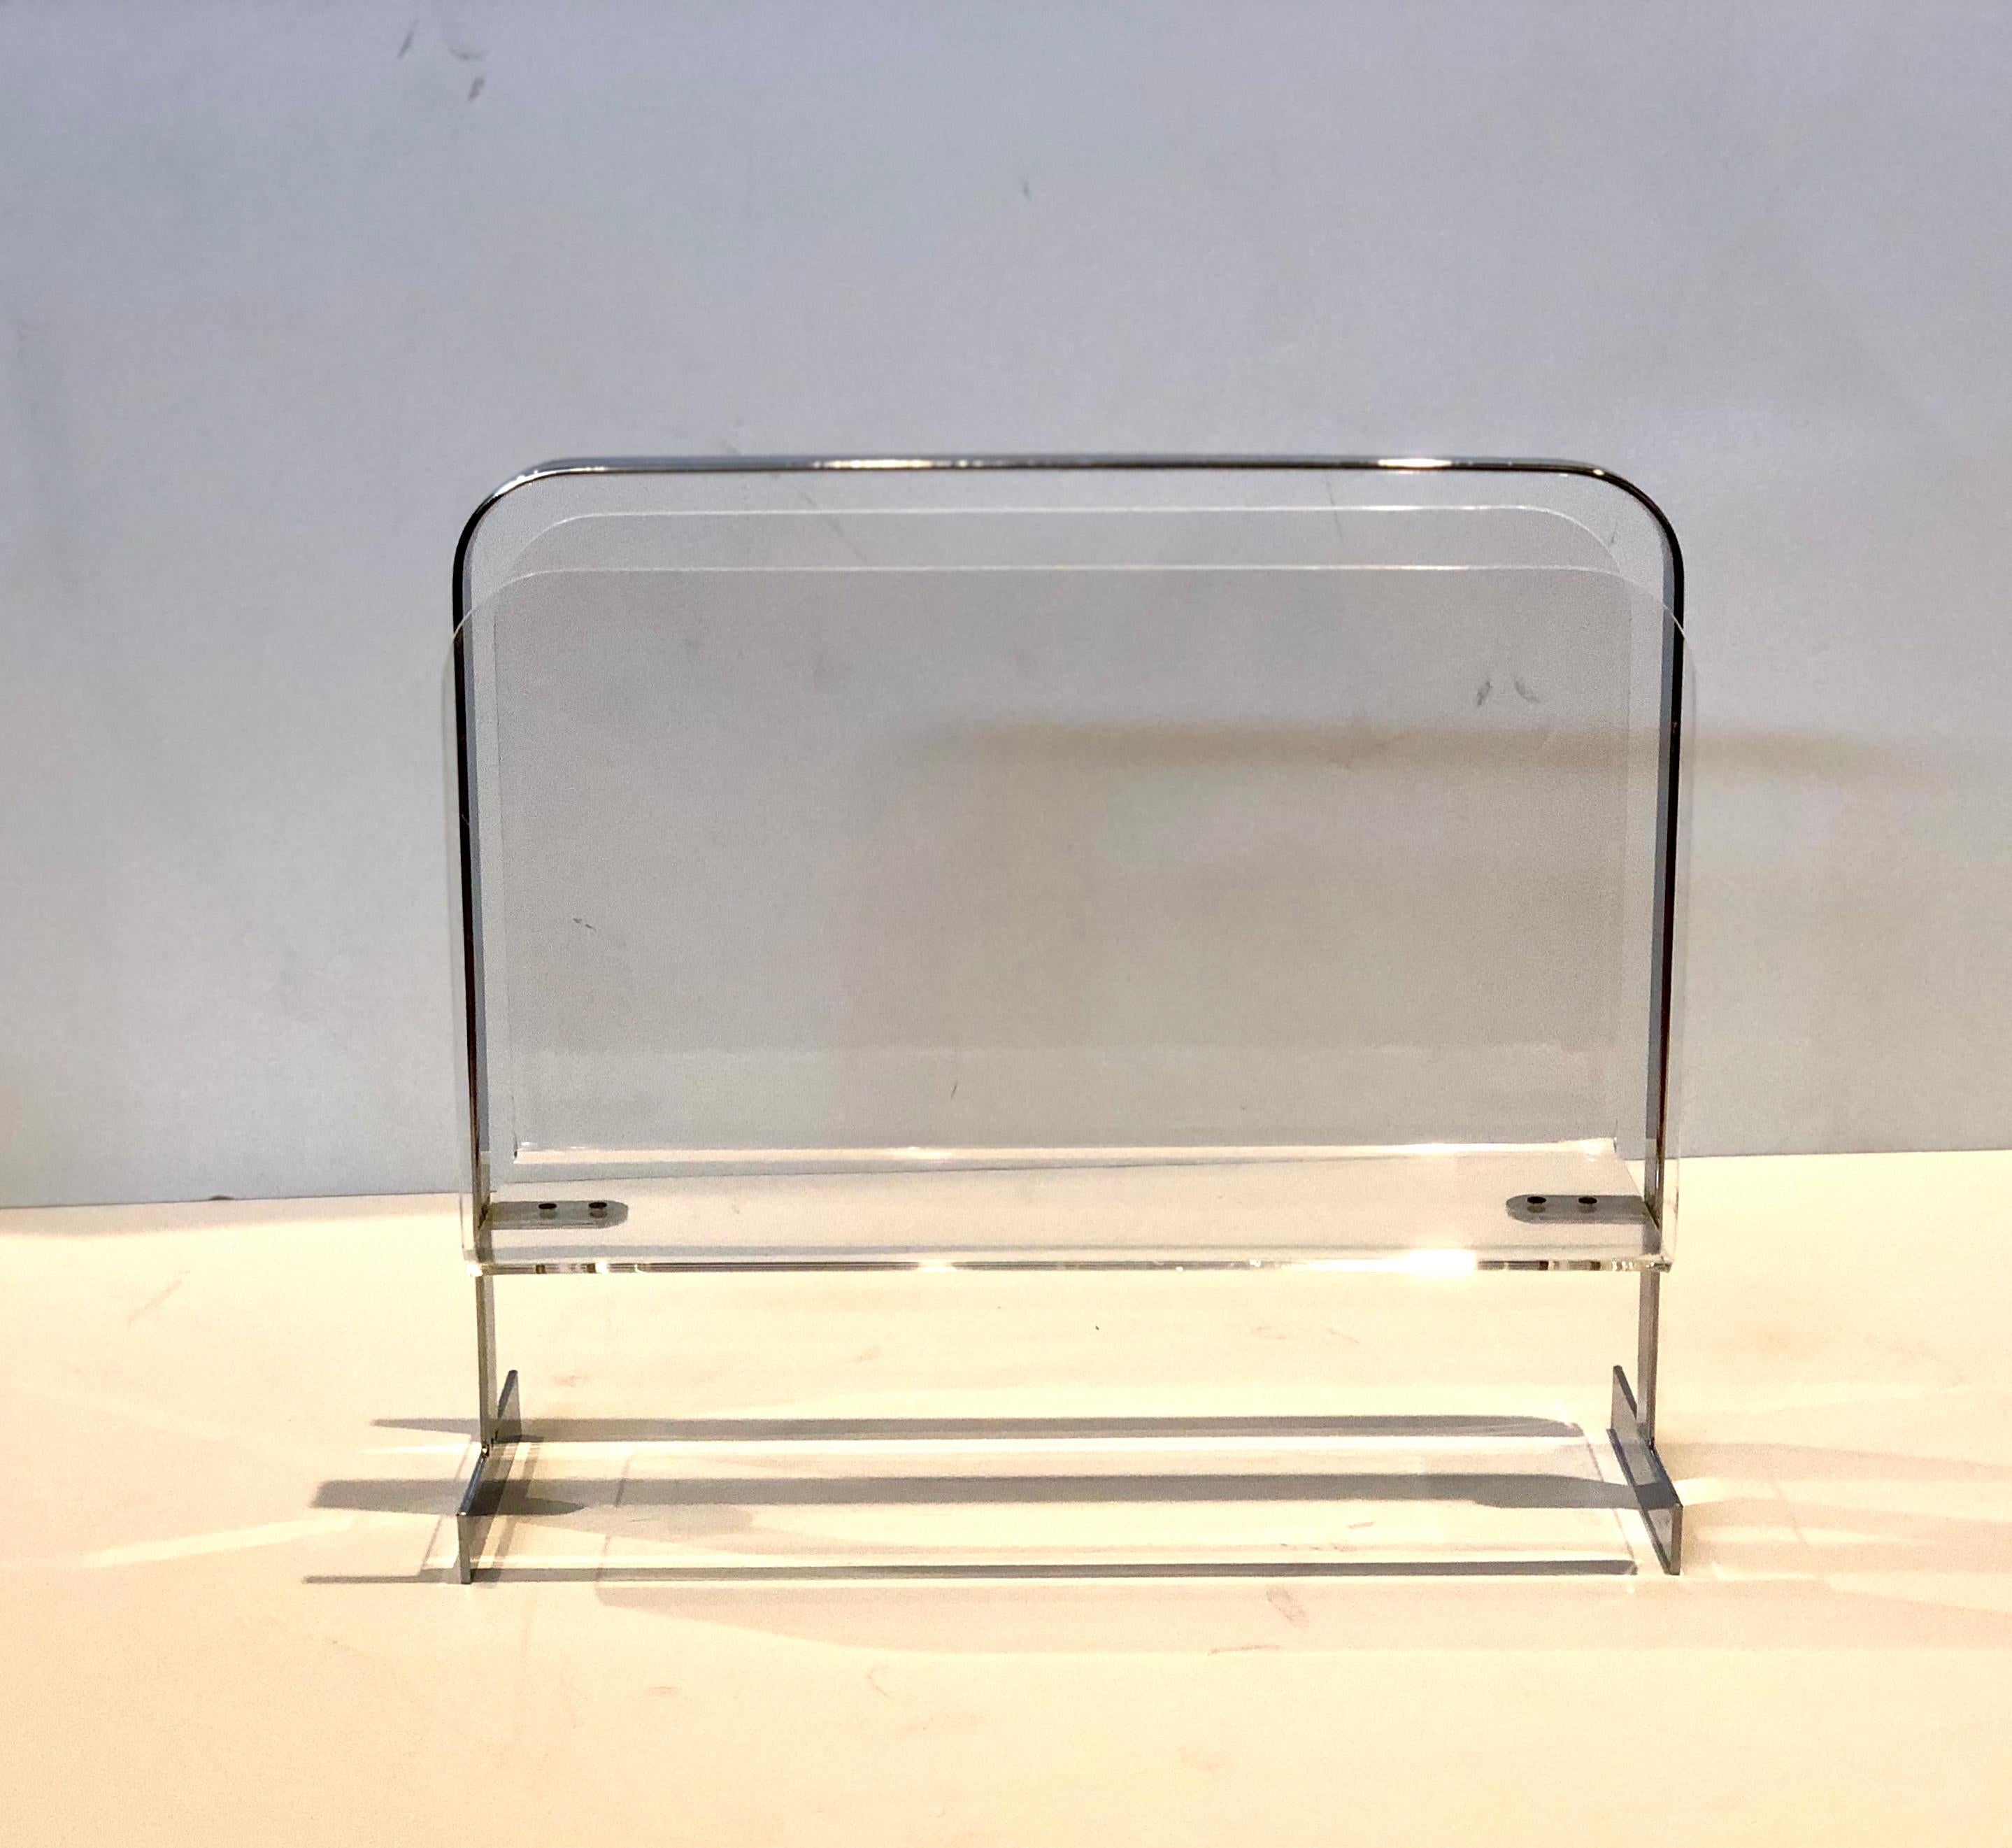 Beautiful magazine holder, circa 1970s solid flat chrome base with Lucite holder, we polished the base and the Lucite very nice and clean condition. Light wear.
   